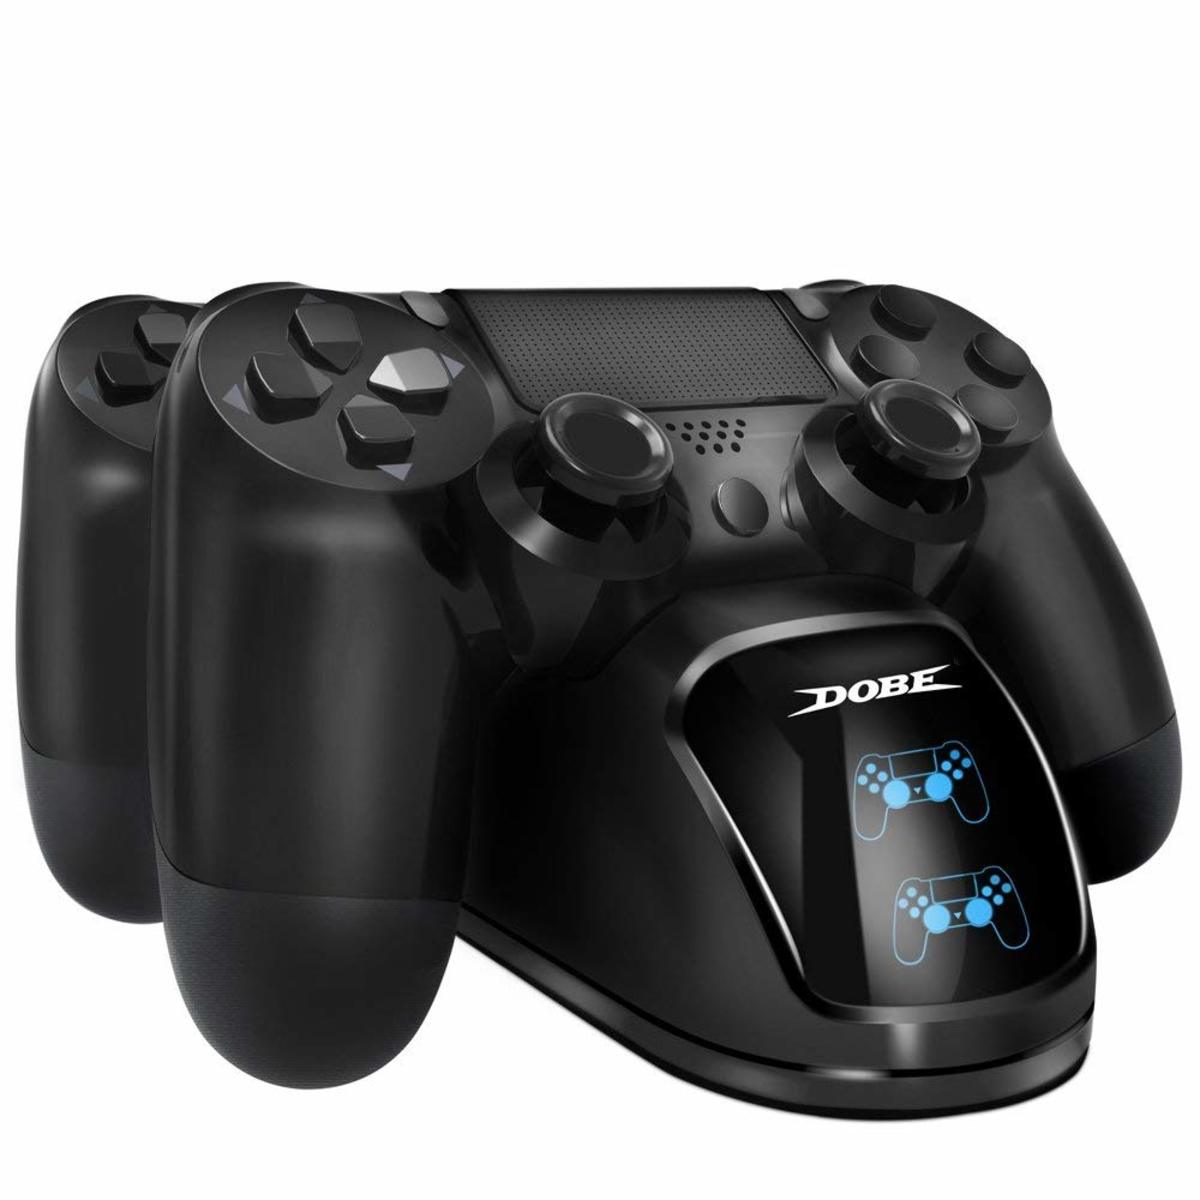 Sony PlayStation DualShock 4 Wireless Controller + Charging Docking Station